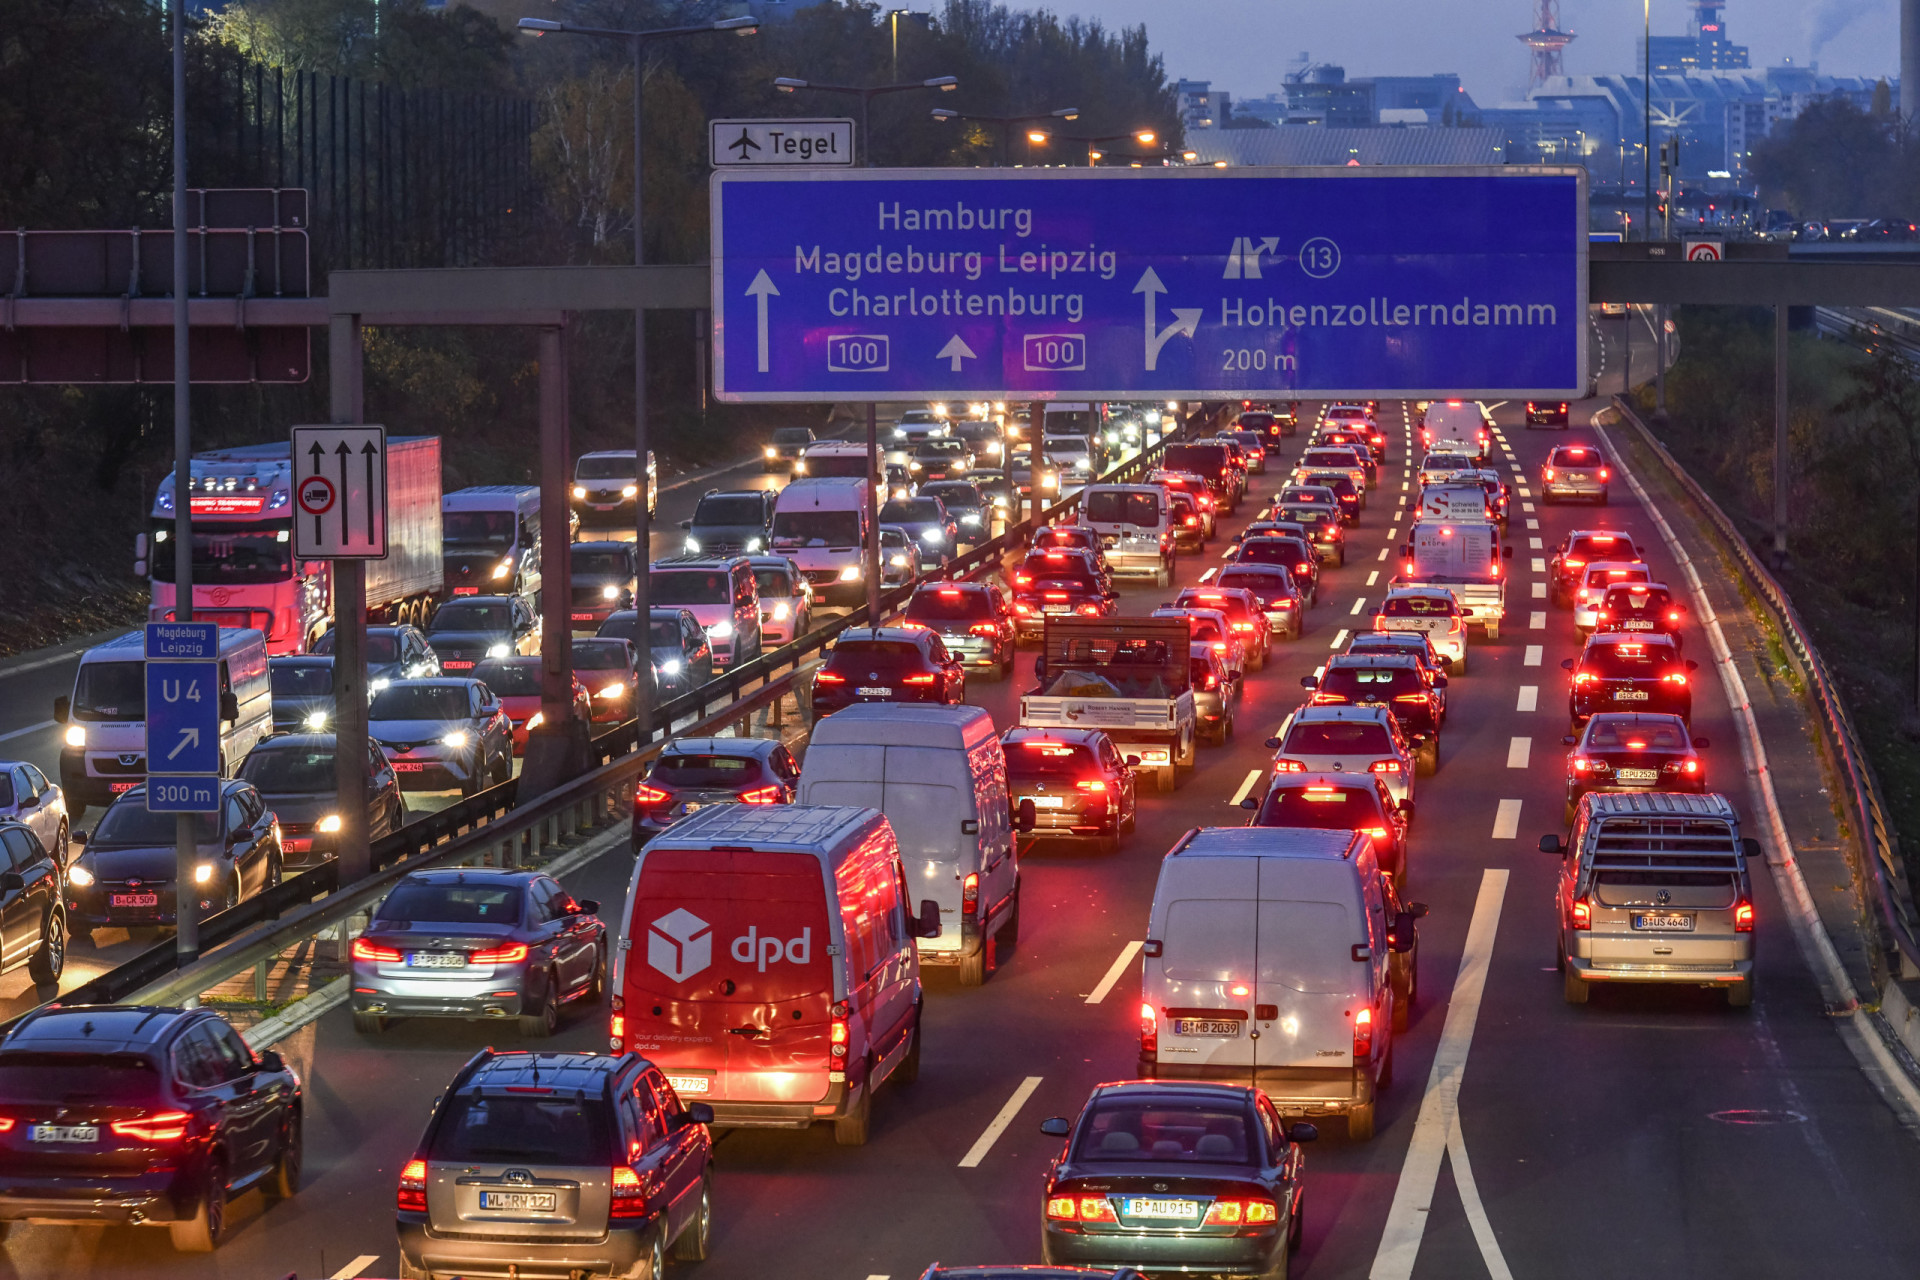 <p>Today, Germany's Autobahn network has an approximate total length of about 8,197 miles (13,192 km)—among the longest and most densest in the world.</p><p><a href="https://www.msn.com/en-us/community/channel/vid-7xx8mnucu55yw63we9va2gwr7uihbxwc68fxqp25x6tg4ftibpra?cvid=94631541bc0f4f89bfd59158d696ad7e">Follow us and access great exclusive content every day</a></p>